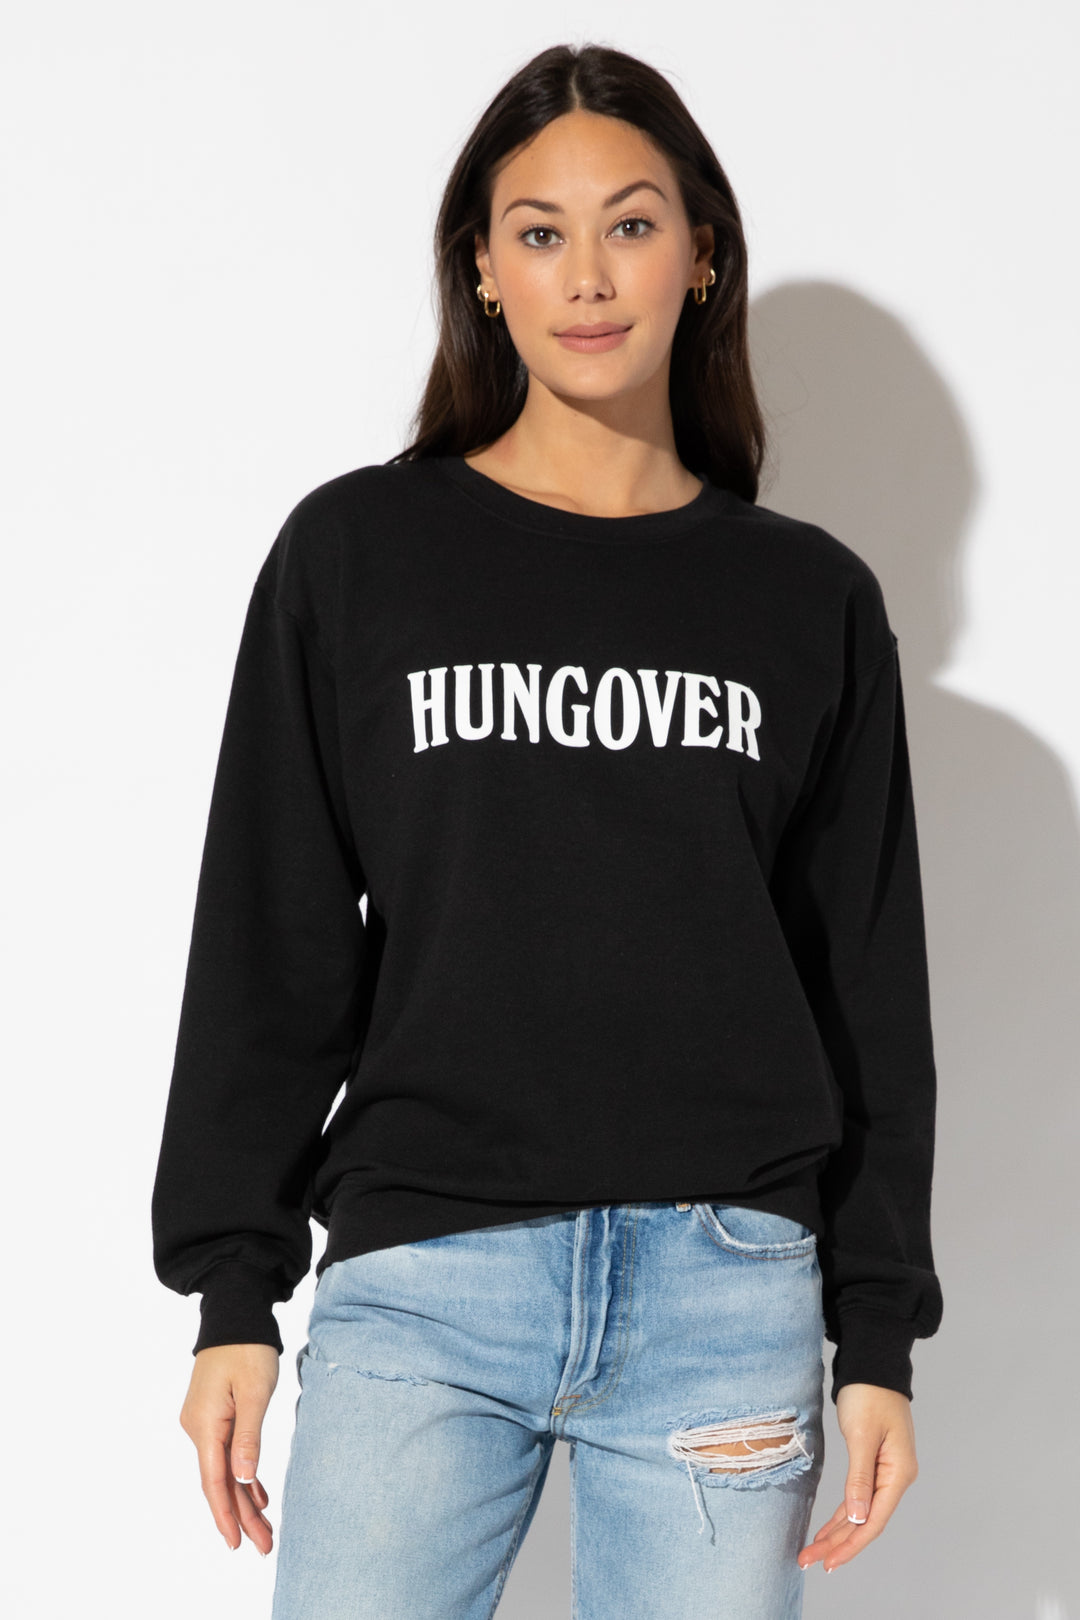 Hungover Willow Sweatshirt | Black - Main Image Number 1 of 1